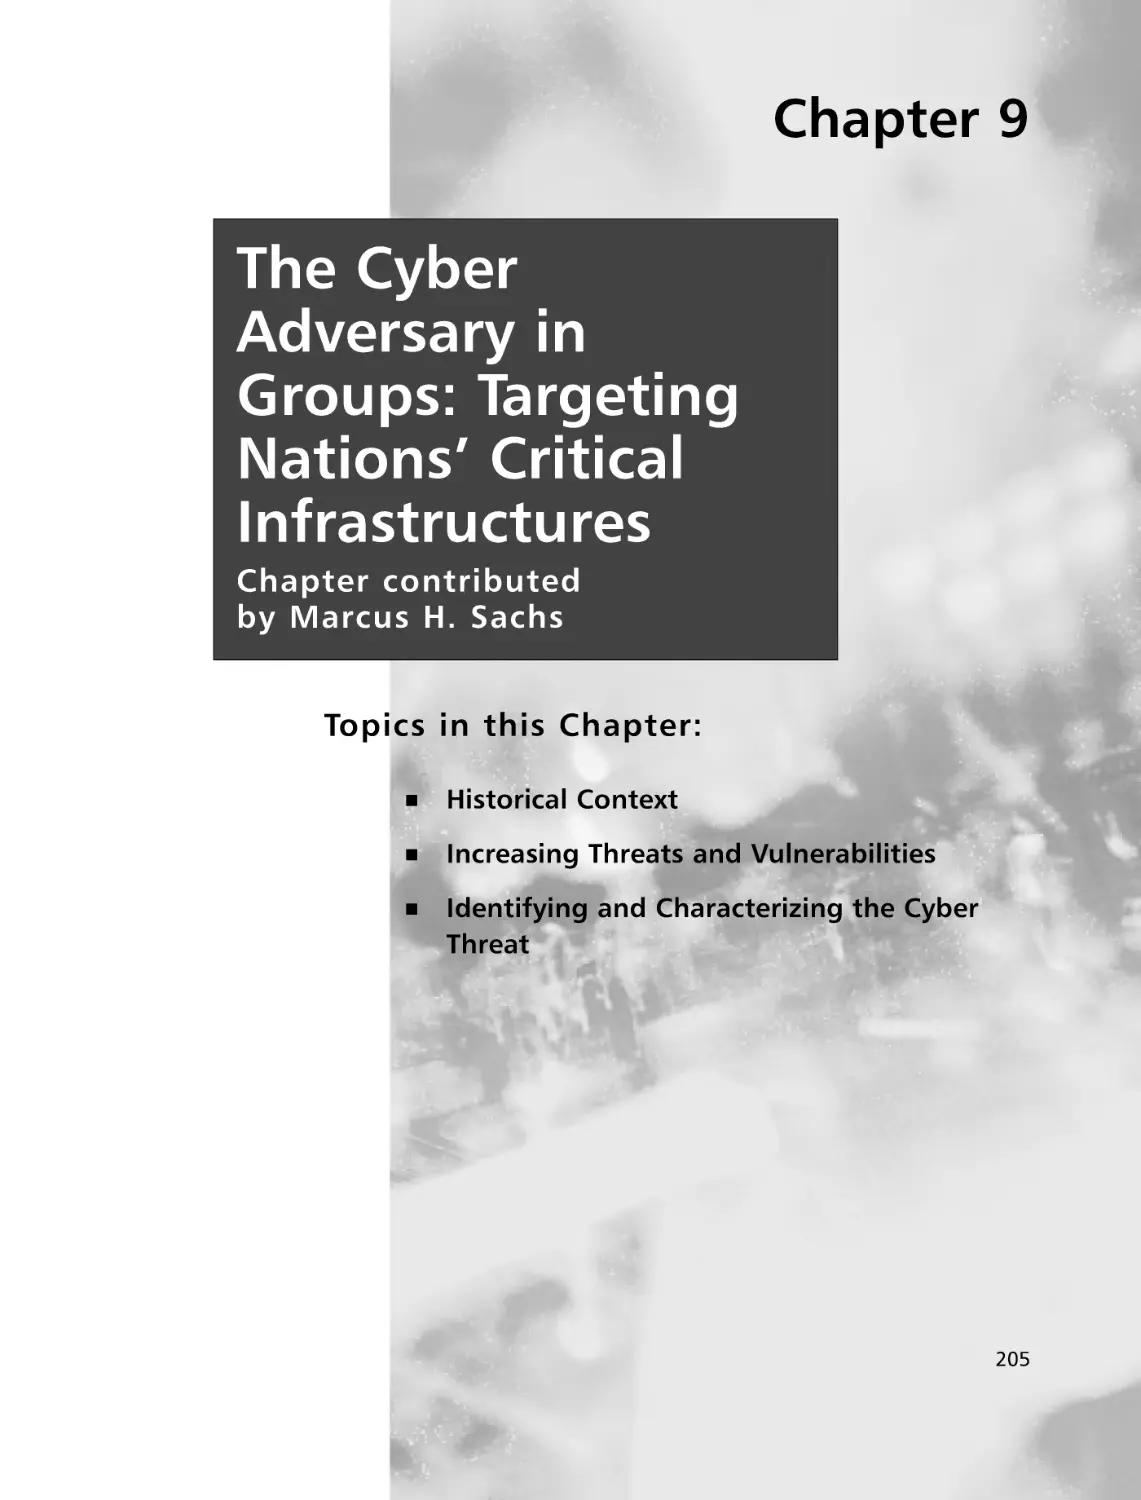 Chapter 9 The Cyber Adversary in Groups